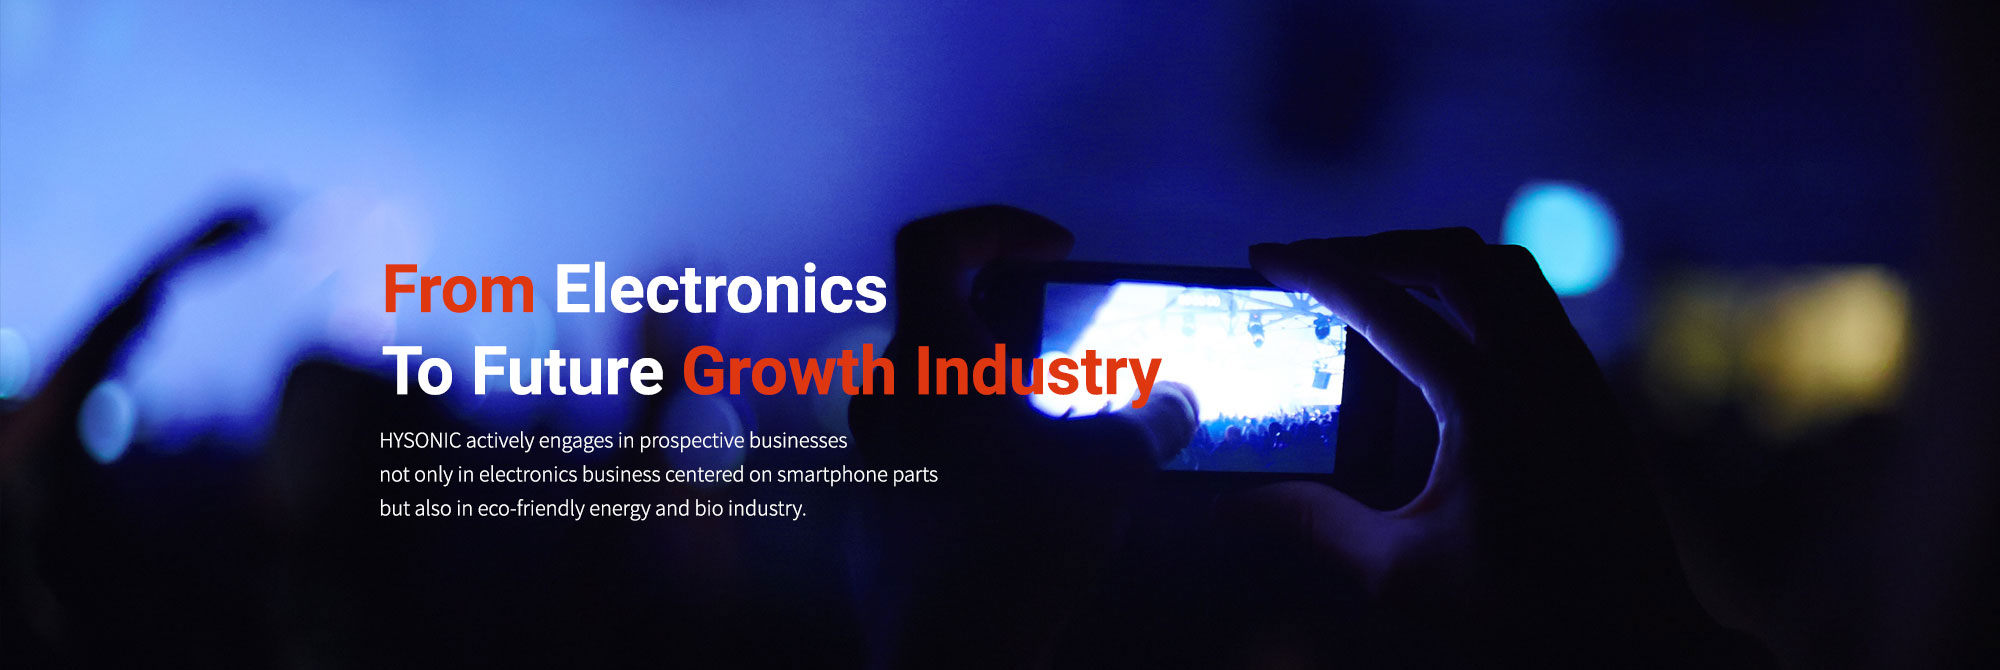 From Electronics to Future growth Industry HYSONIC actively engages in prospective businesses not only in electronics business centered on smartphone parts but also in eco-friendly energy and bio industry.